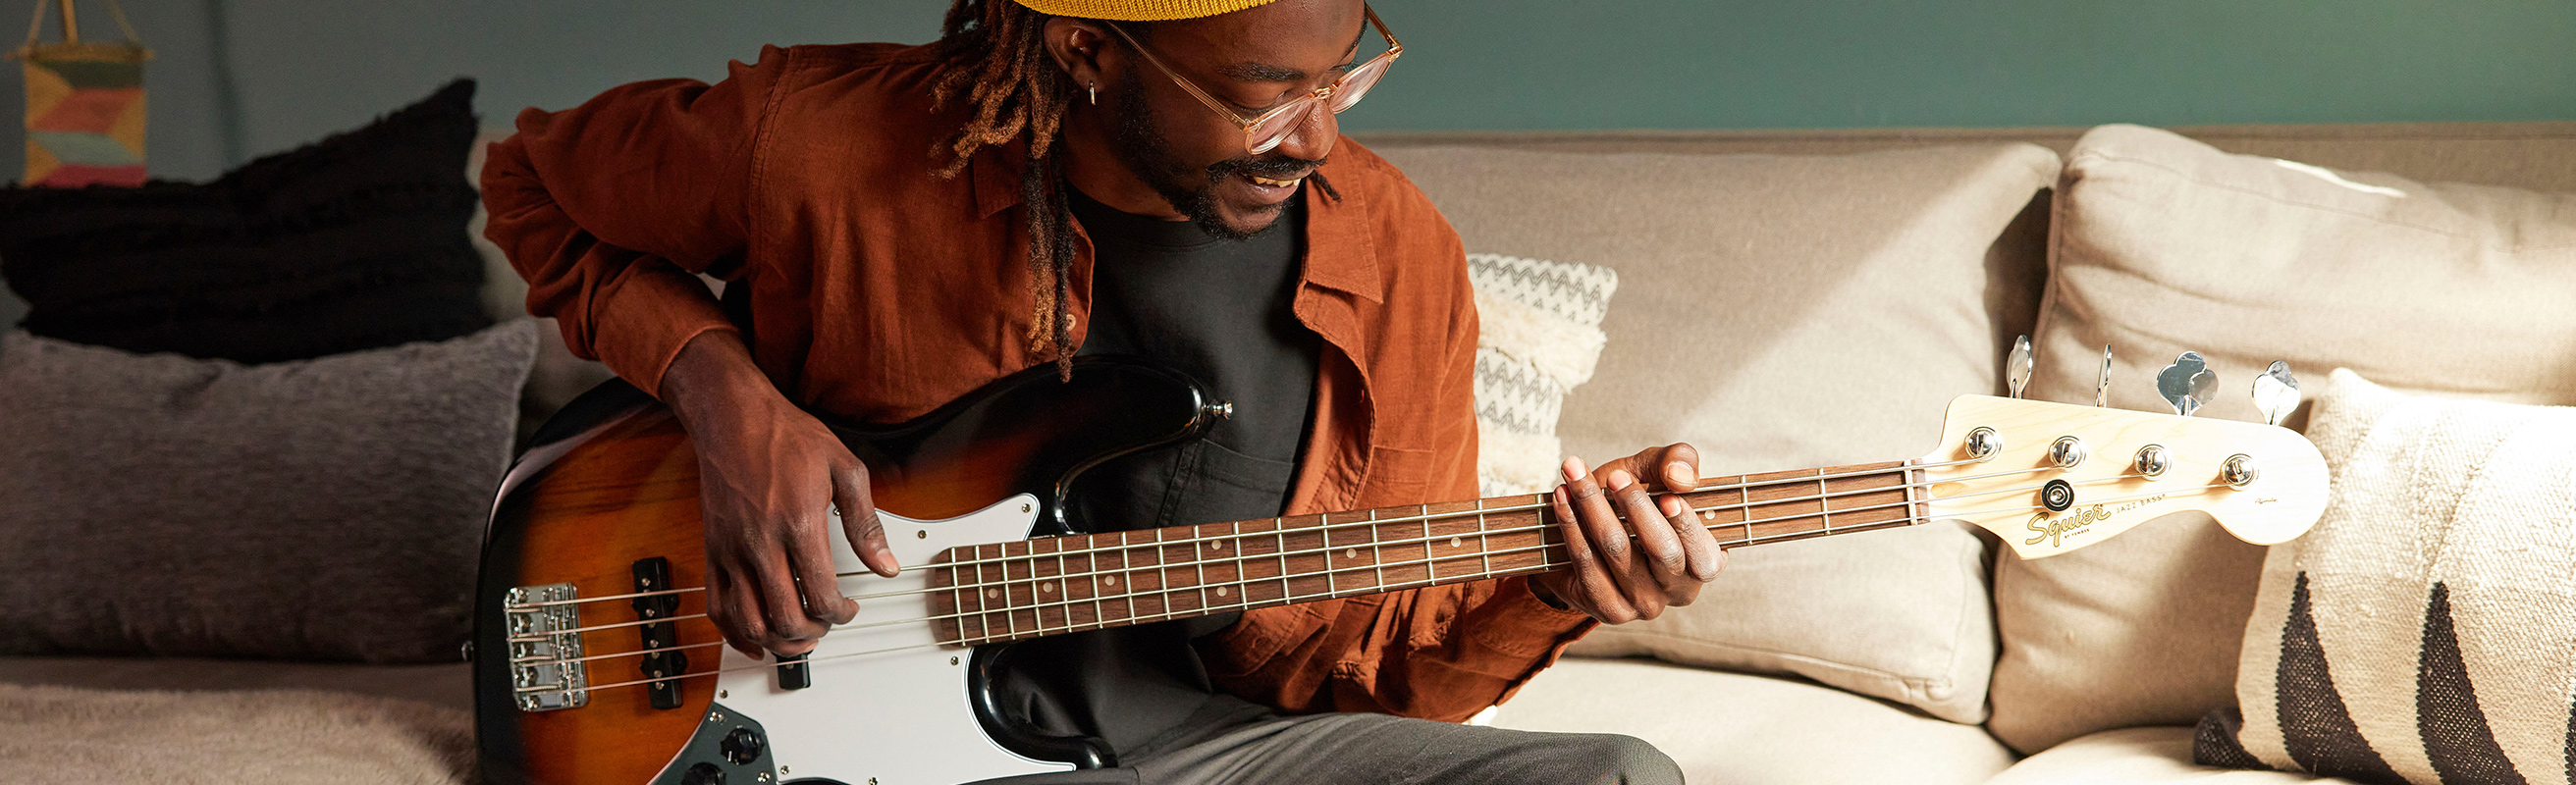 Top 10 bass accessories and tools every bass player needs to have